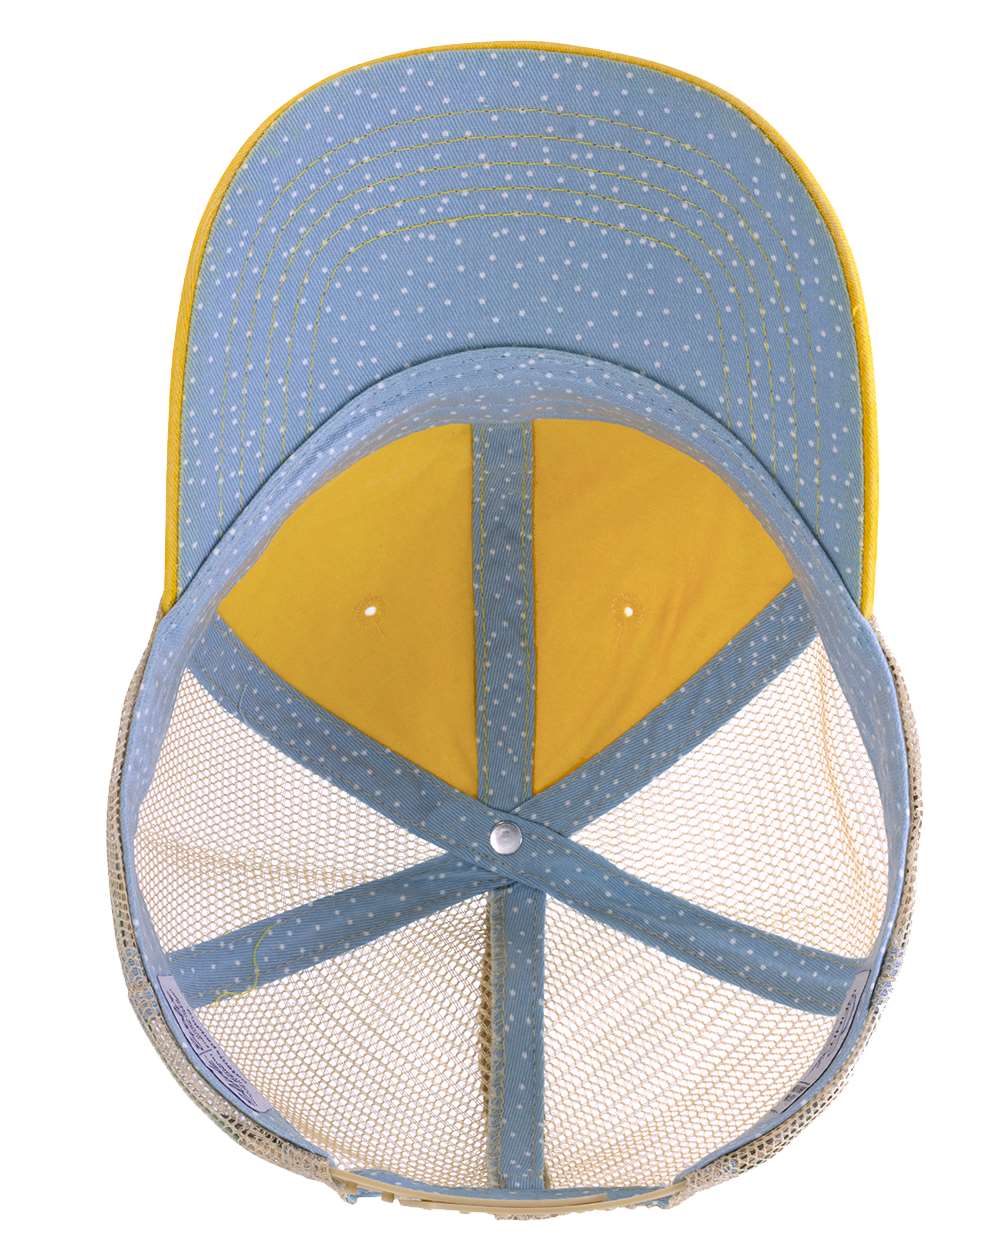 A women's washed mesh-back cap in sunset yellow with polka dot pattern on the front panel.